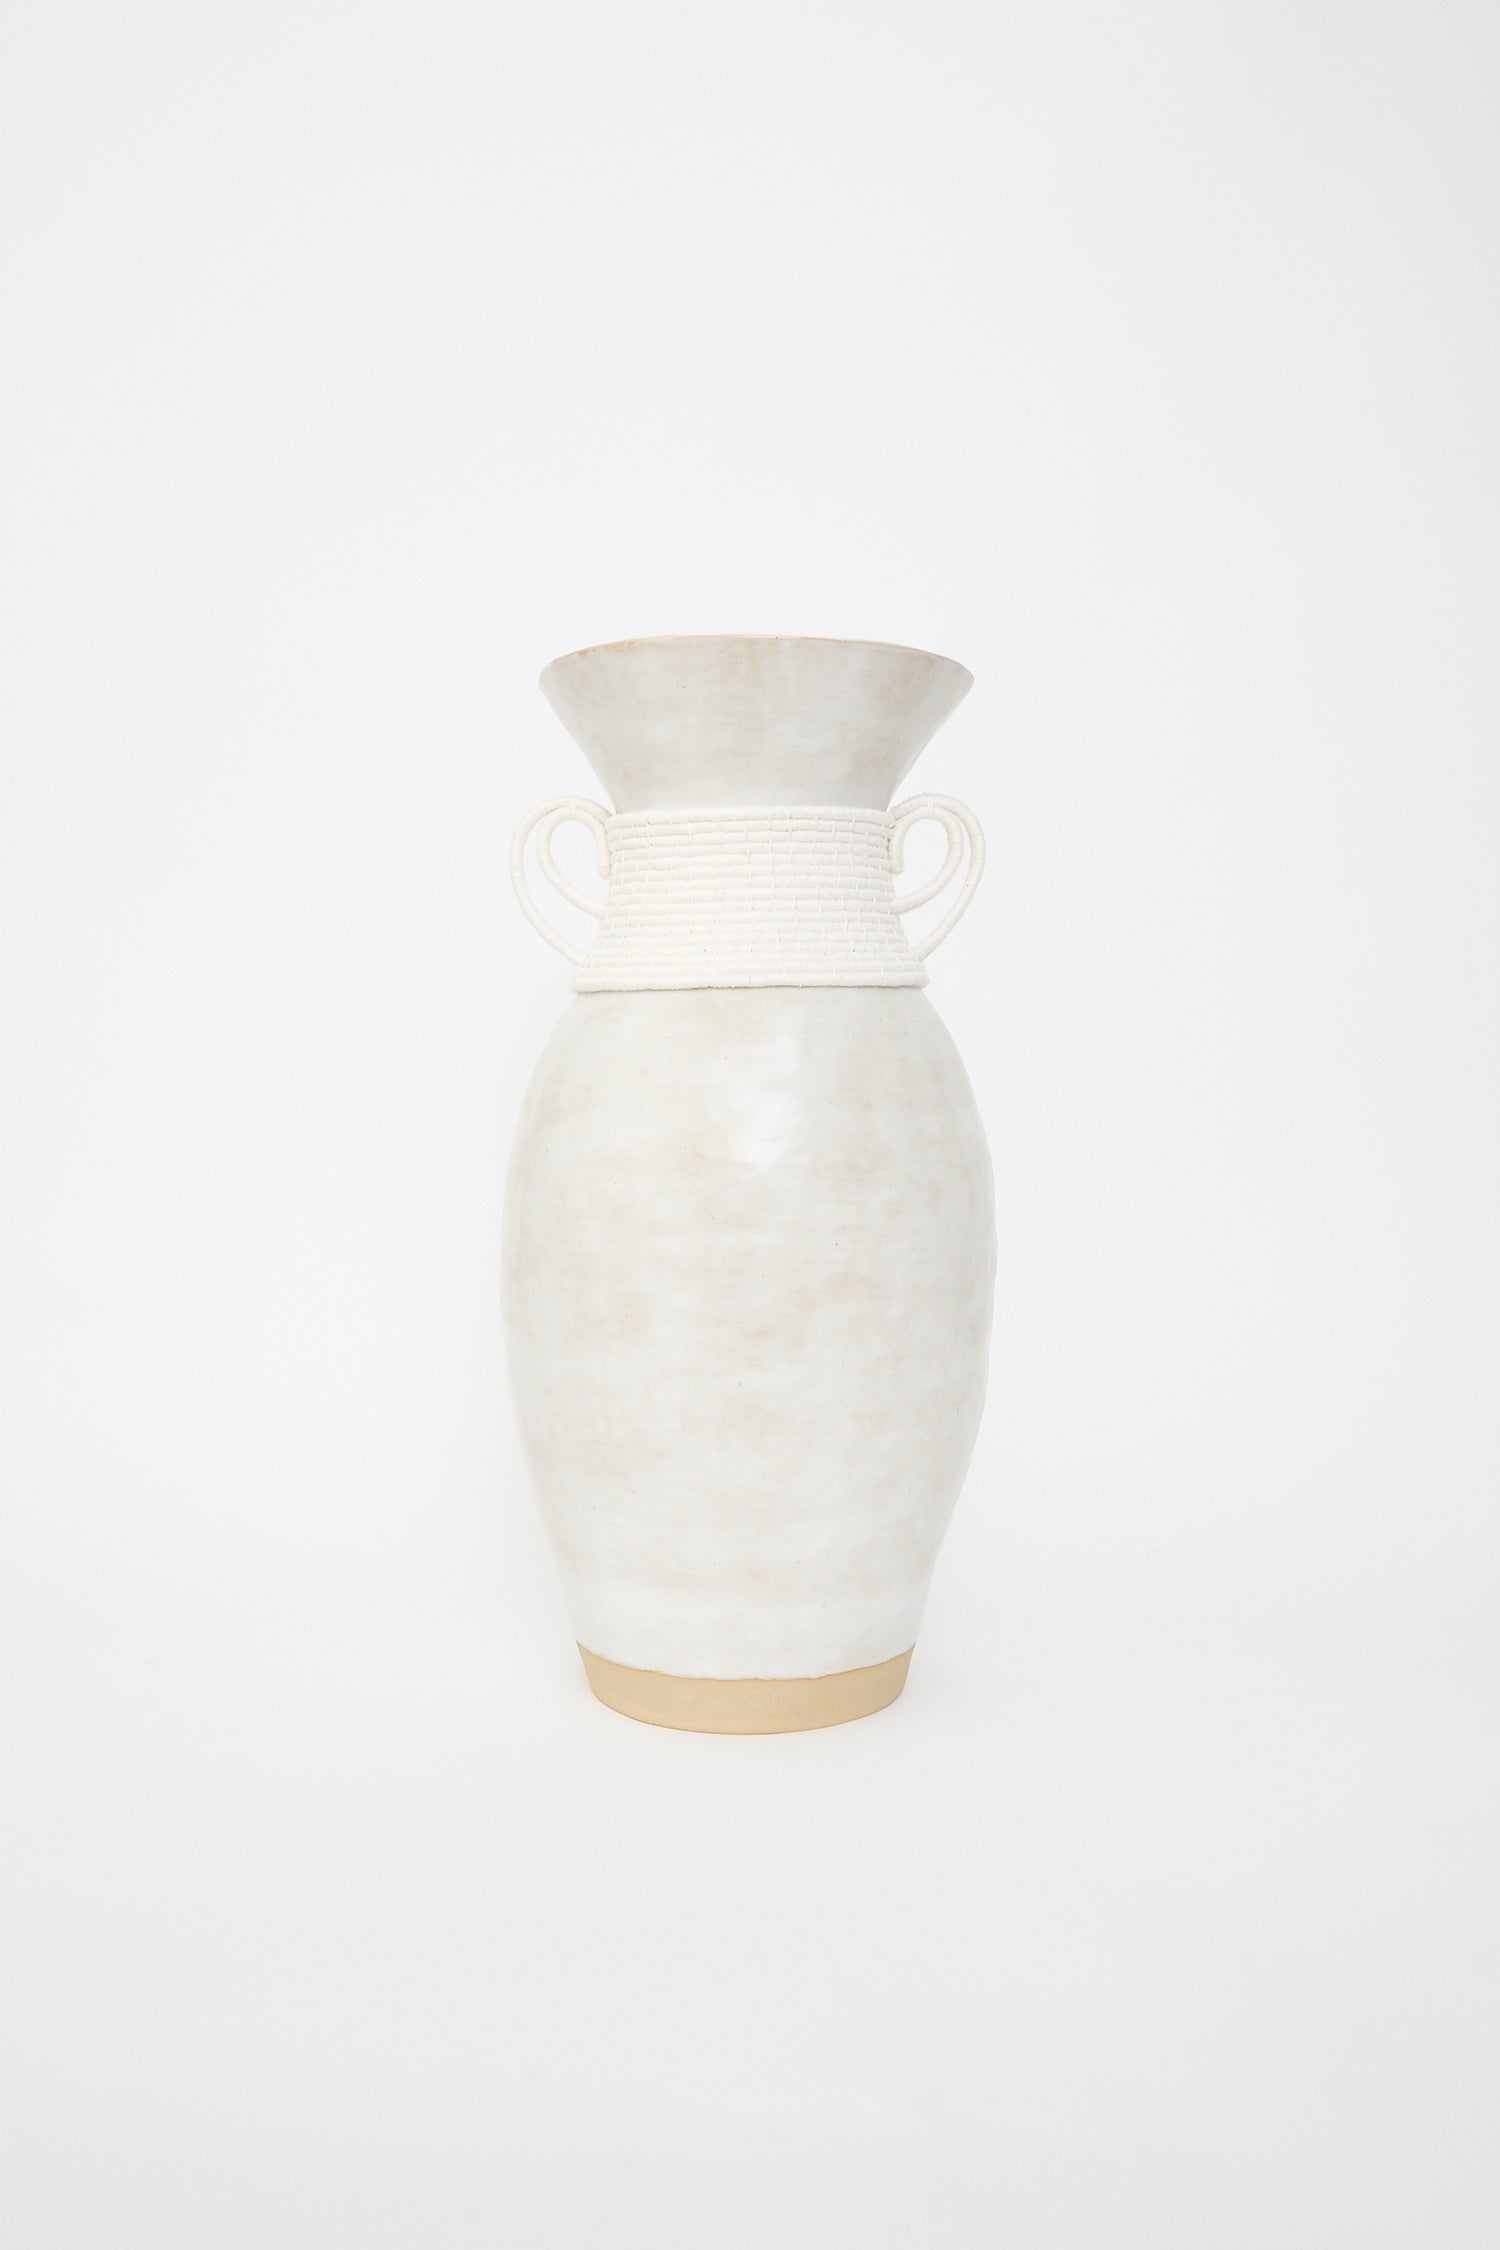 A handcrafted Karen Tinney stoneware Vase #810 with twin handles on a White background.